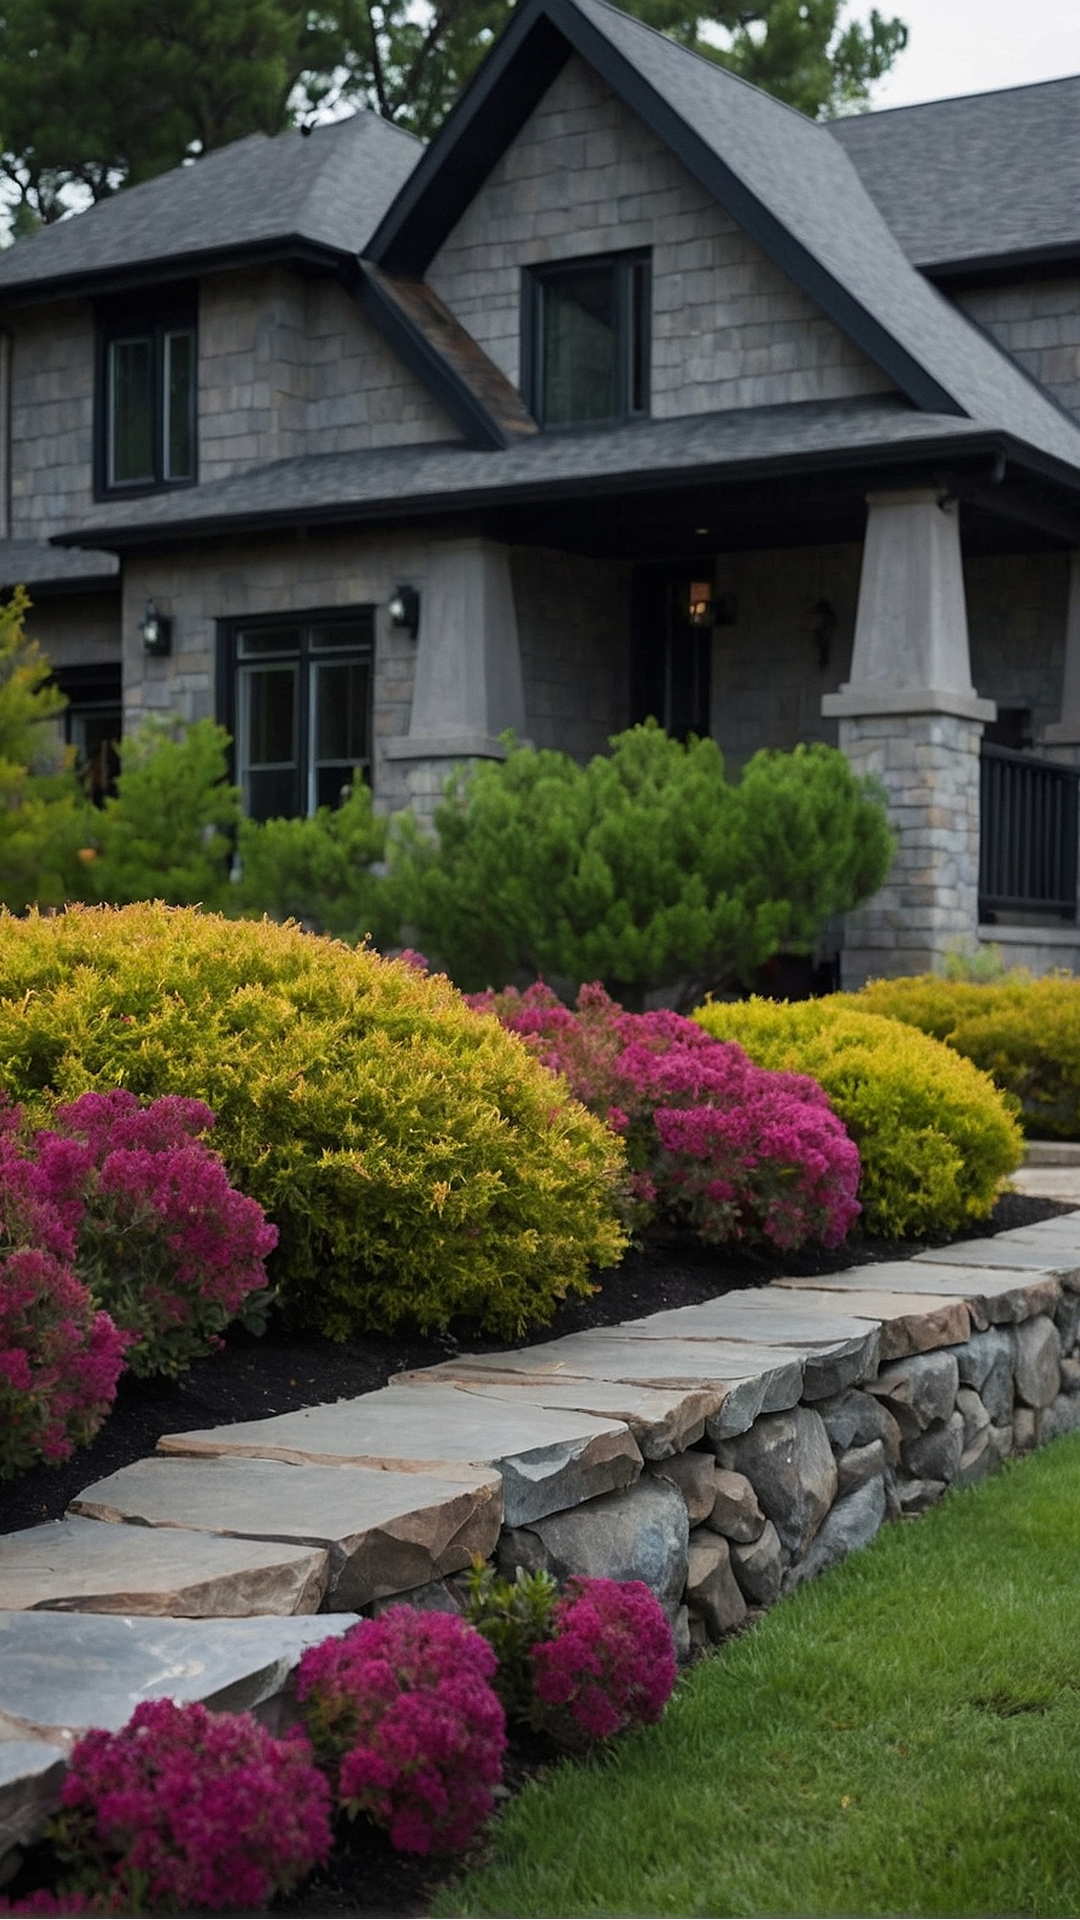 Rhododendron Shrubs: Adding Color to Your Front Yard